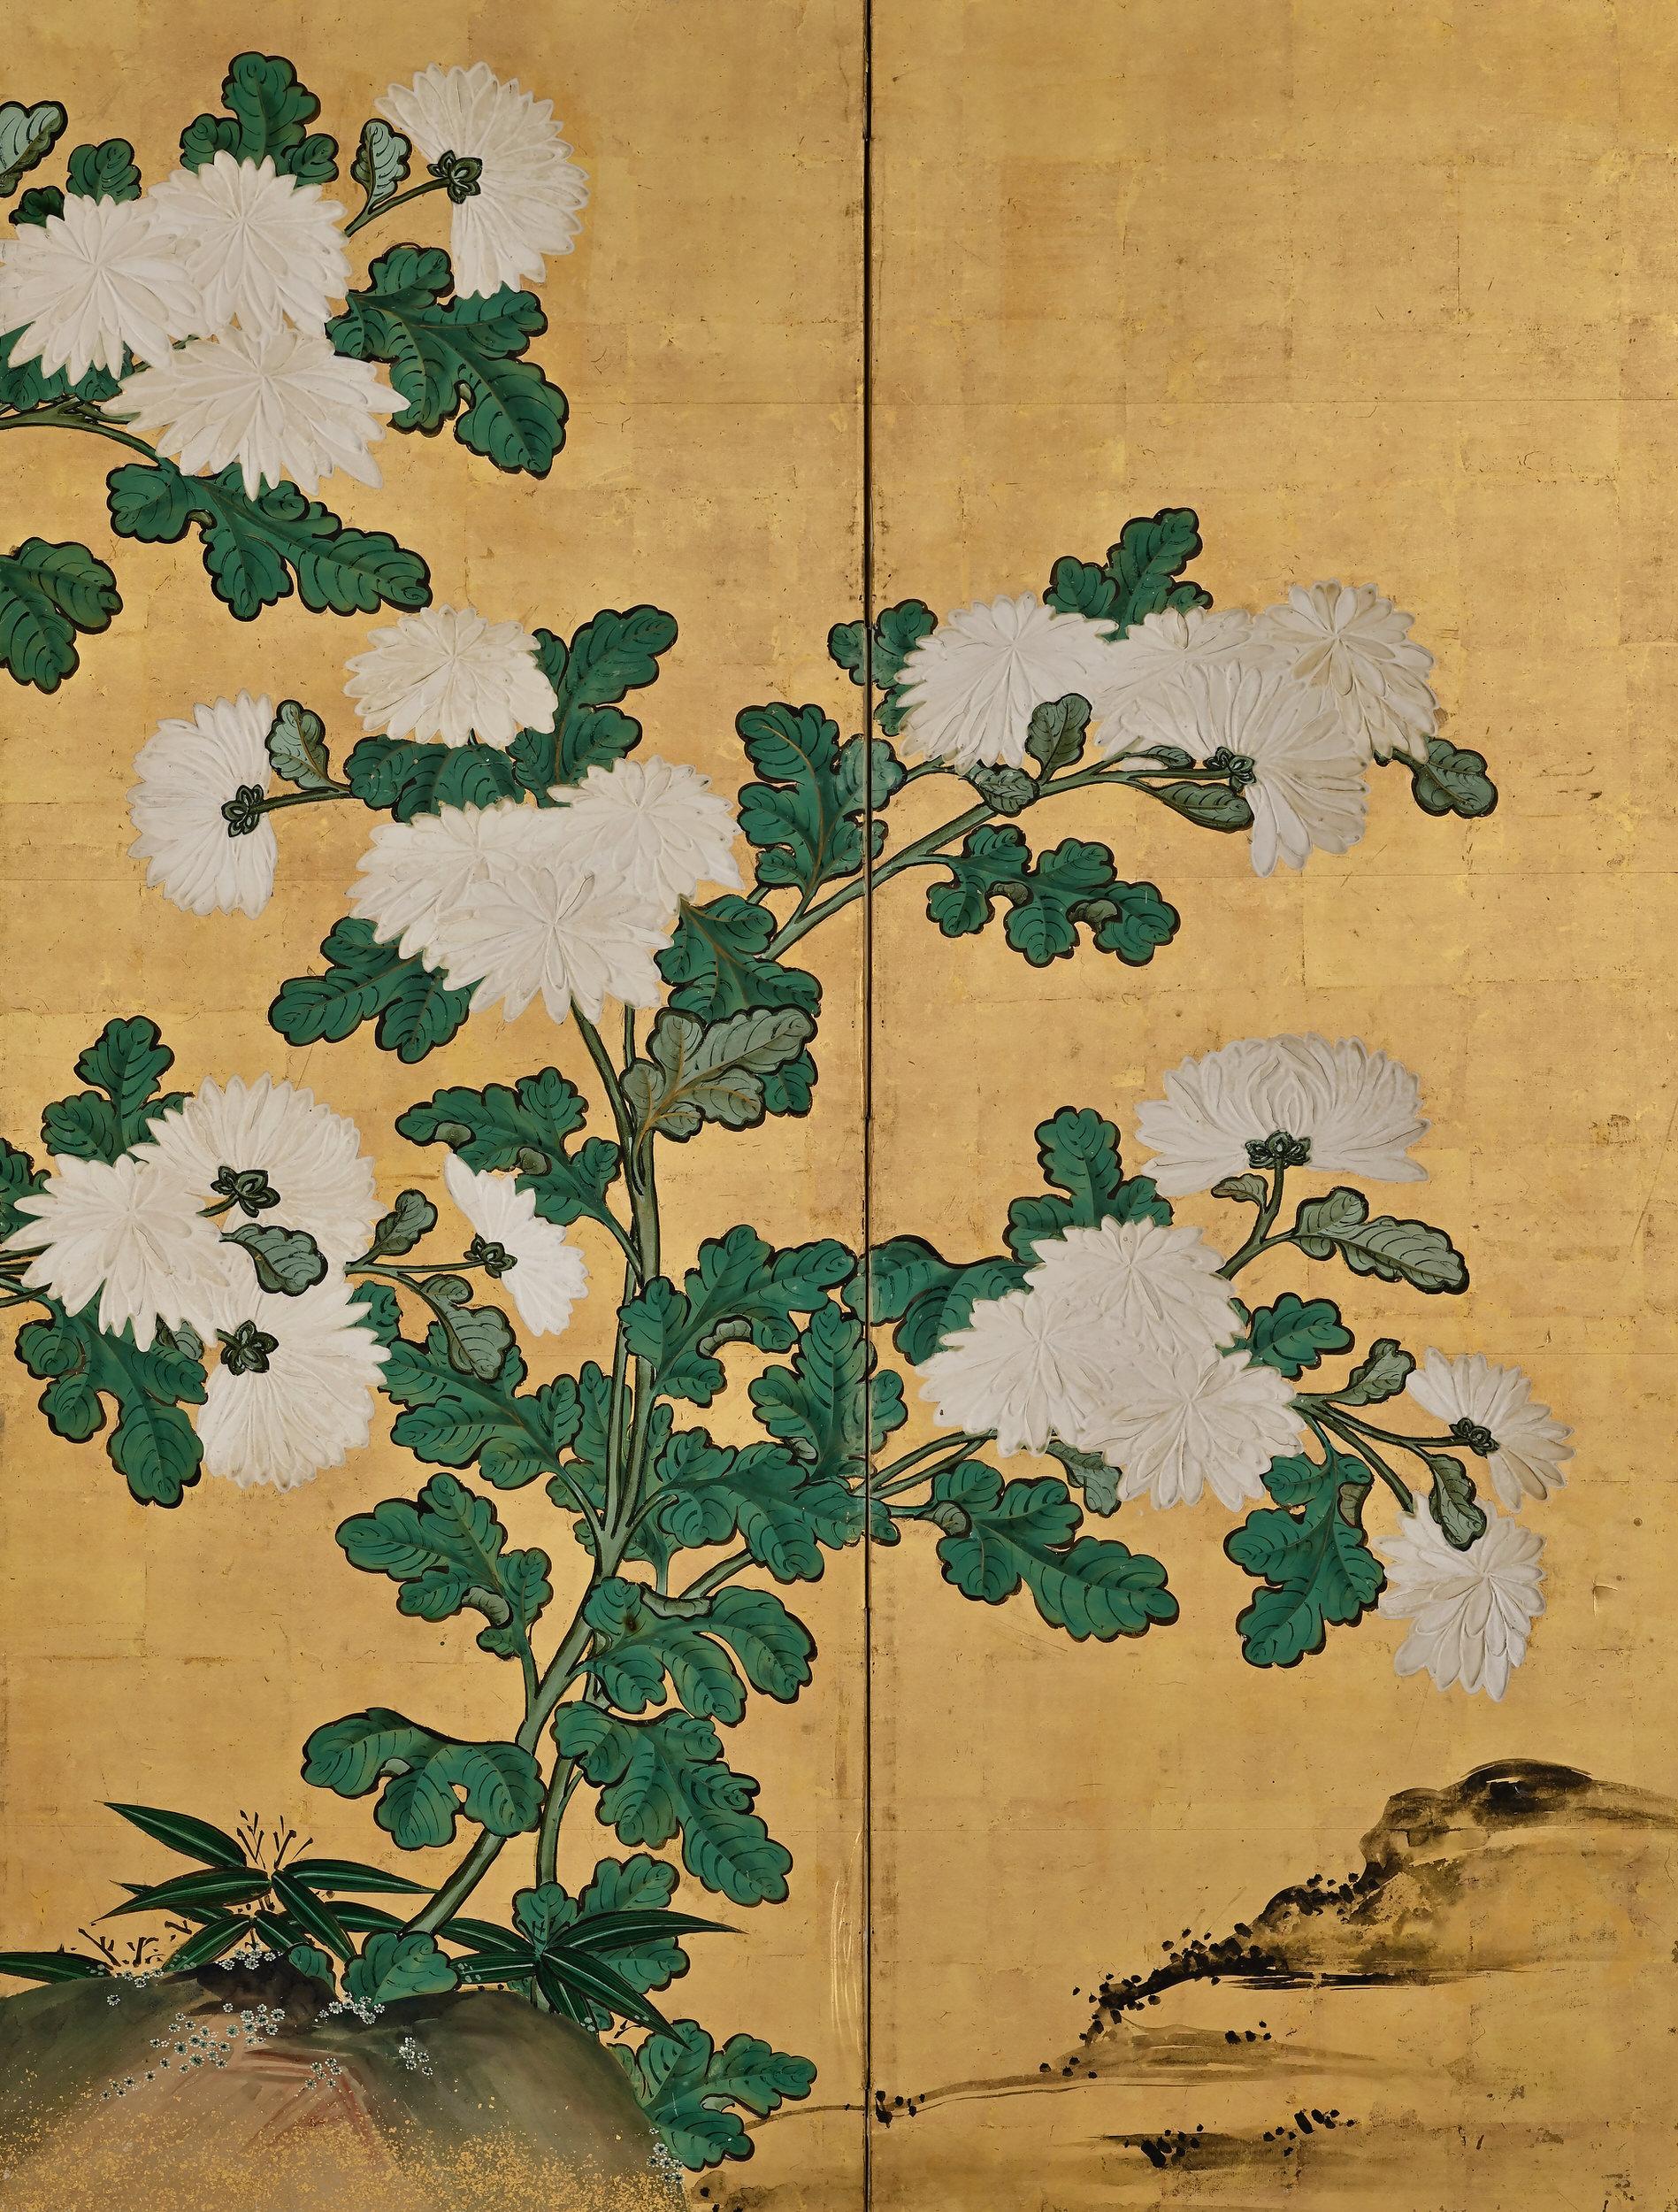 Hand-Painted Mid-18th Century Japanese Screen Pair, One Hundred Flowers, Chrysanthemums For Sale